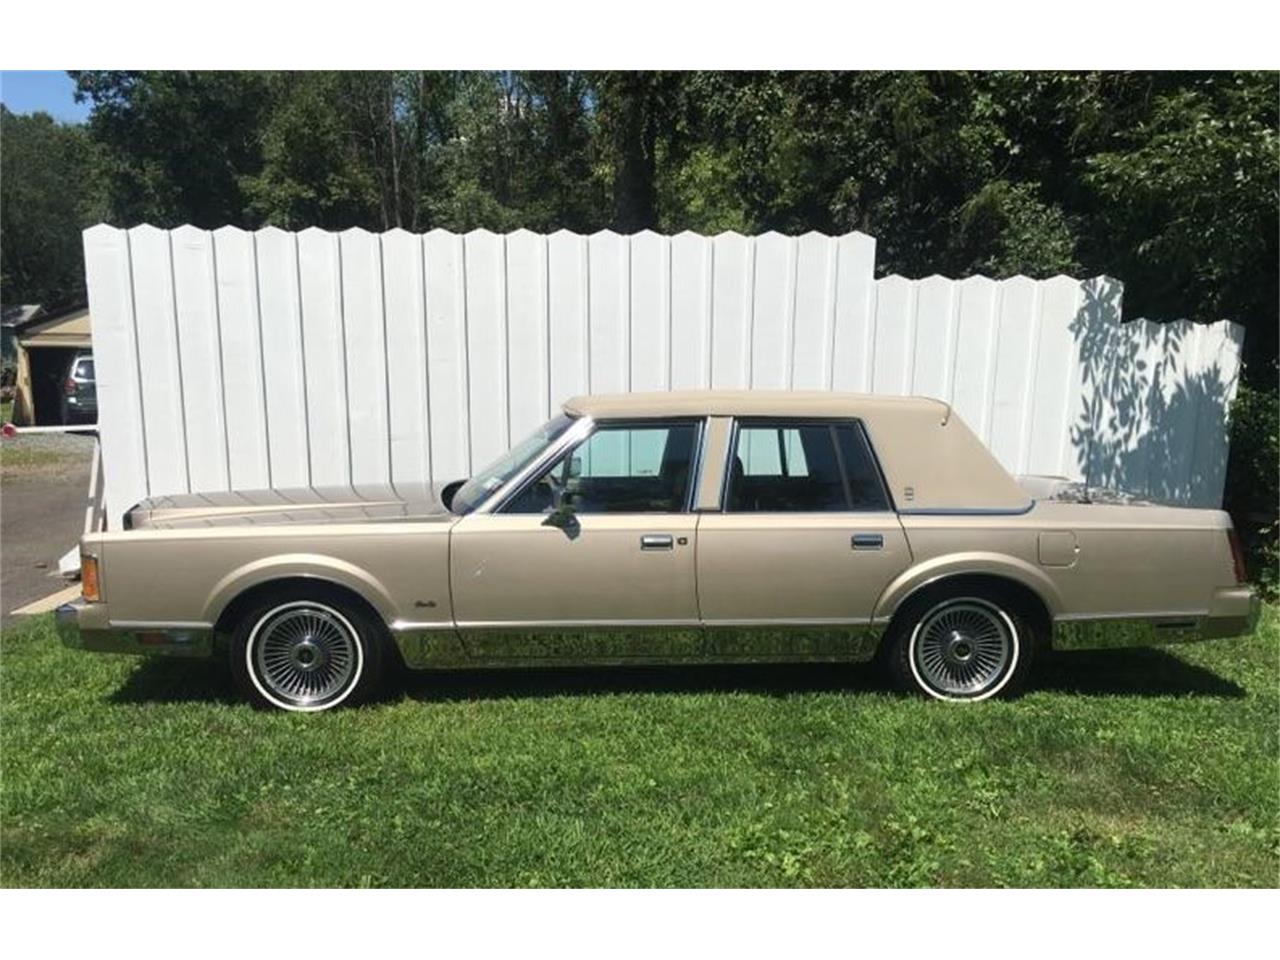 89 lincoln town car information